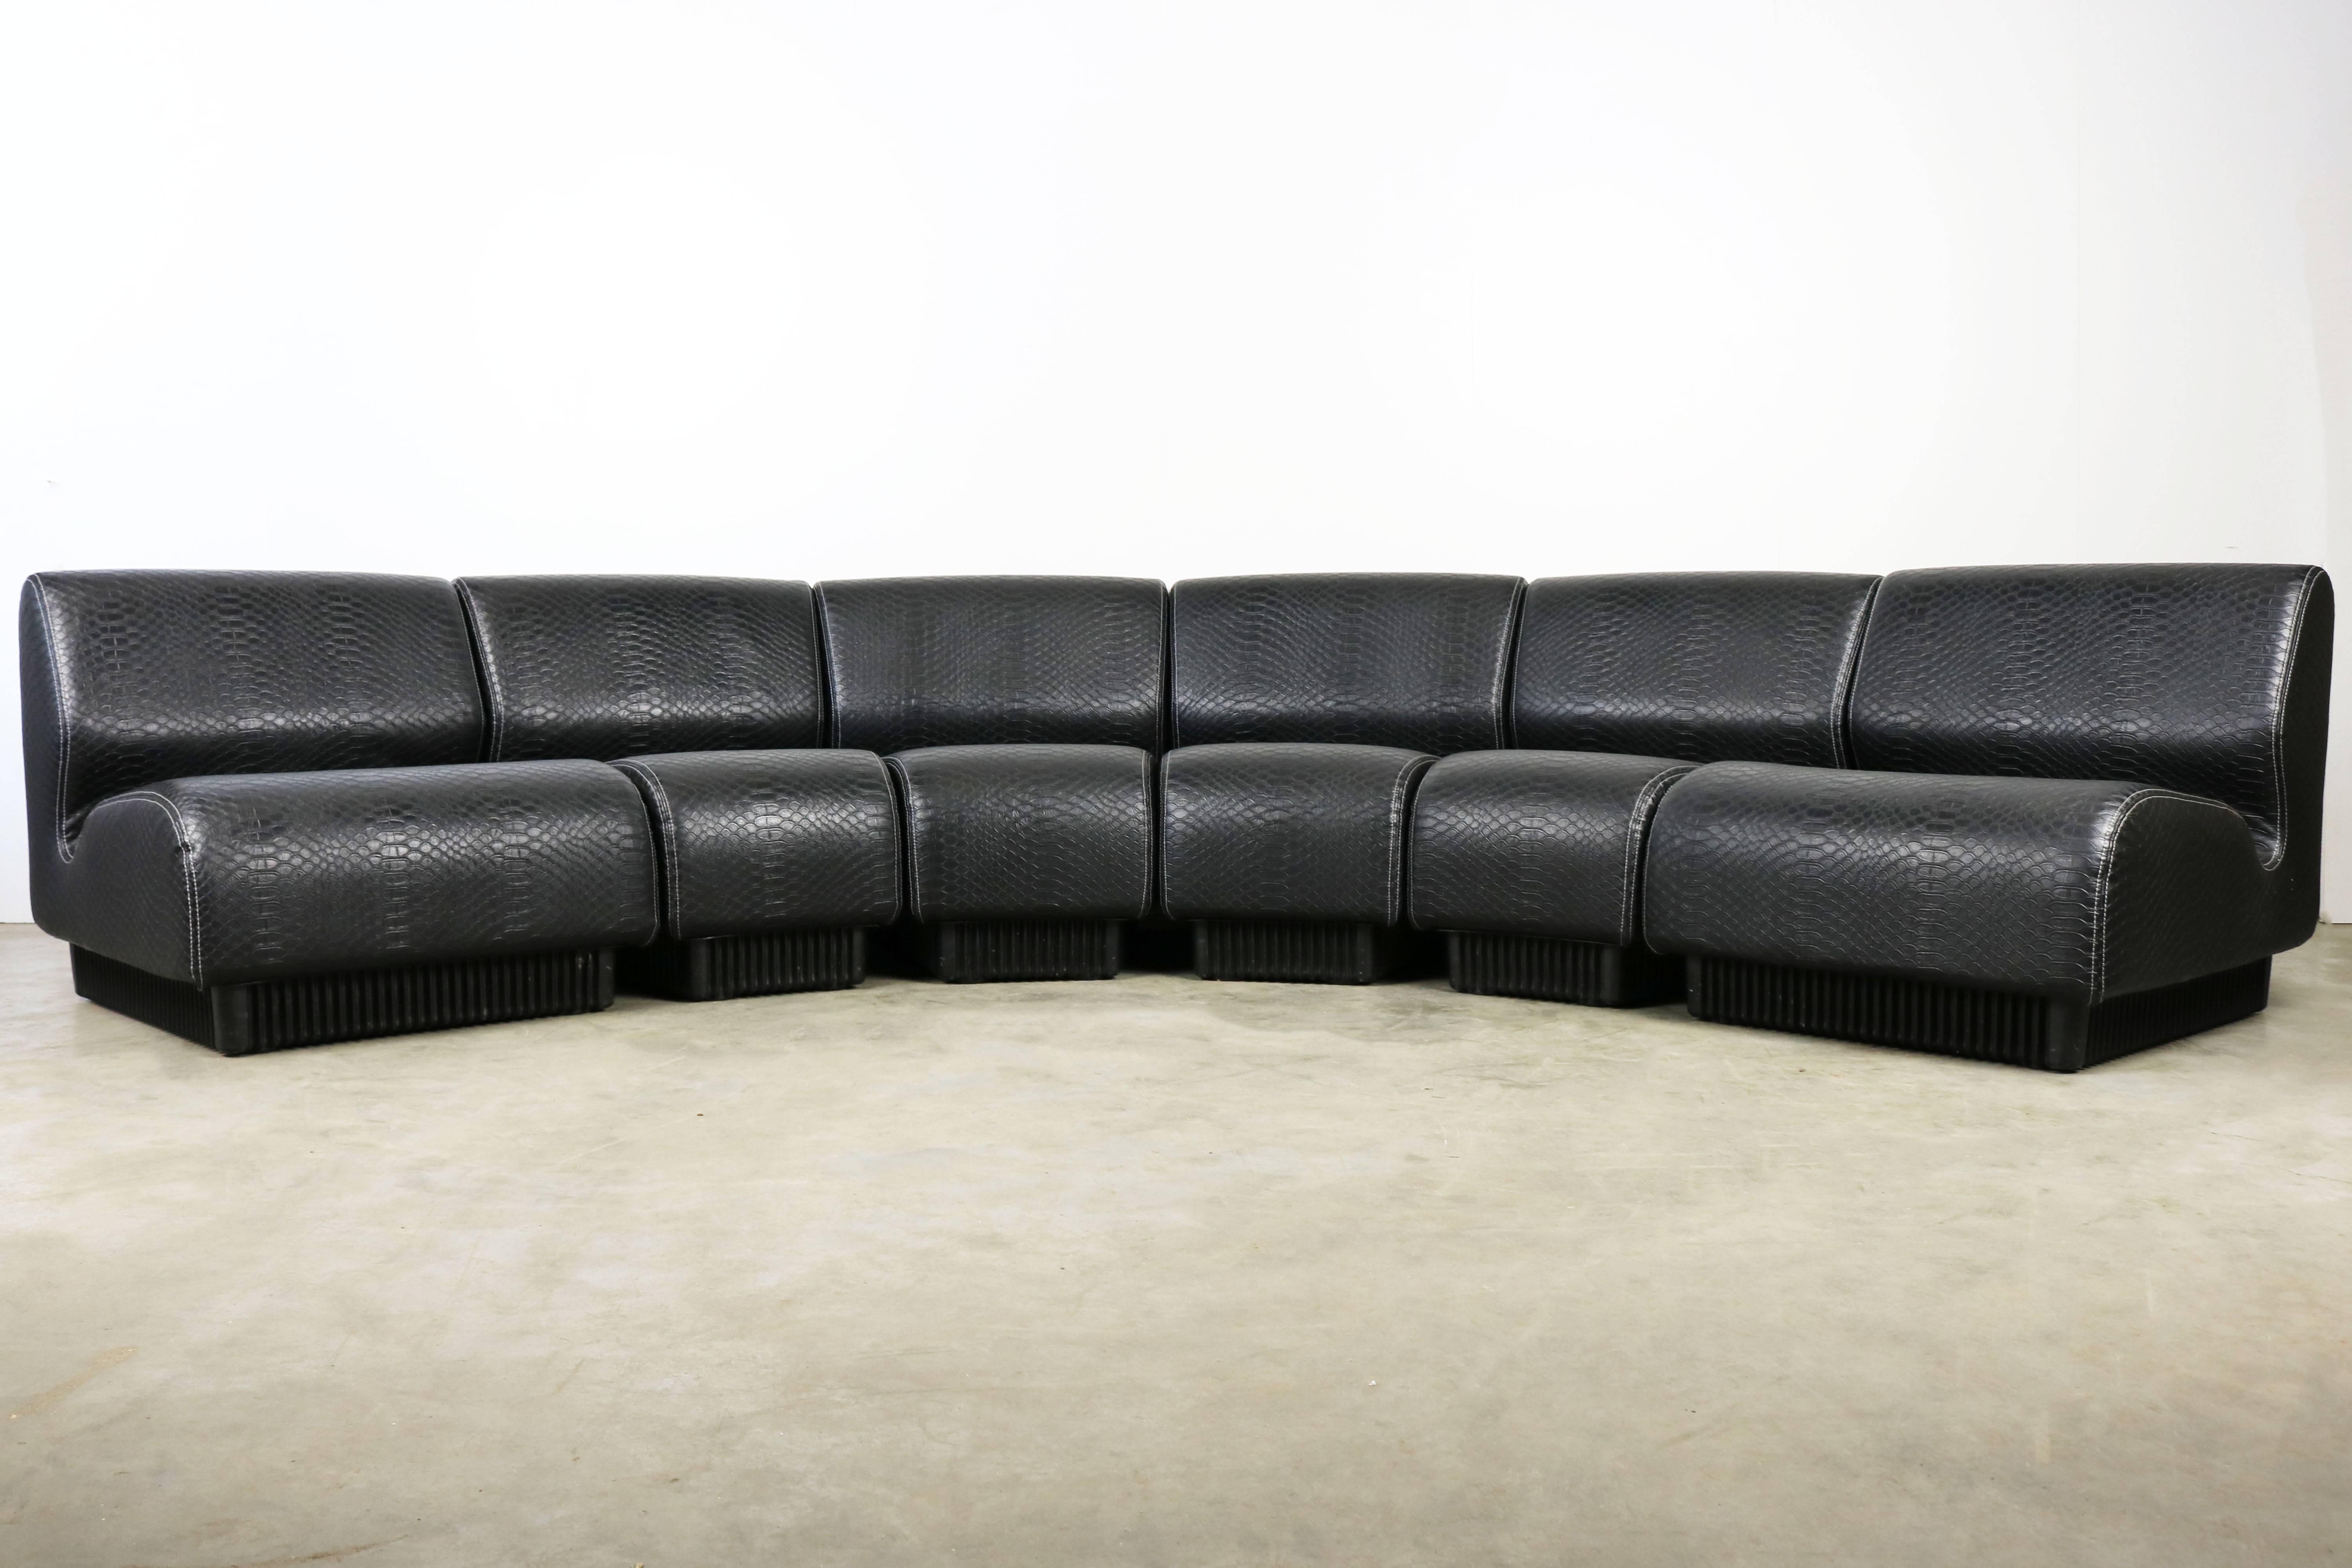 Wonderful midcentury modular sofa by Don Chadwick for Herman Miller 1970 consisting of six pieces.
Professionally re-upholstered in a high quality exceptional black snakeskin upholstery (faux leather).
The sofa is made out of six modules and can